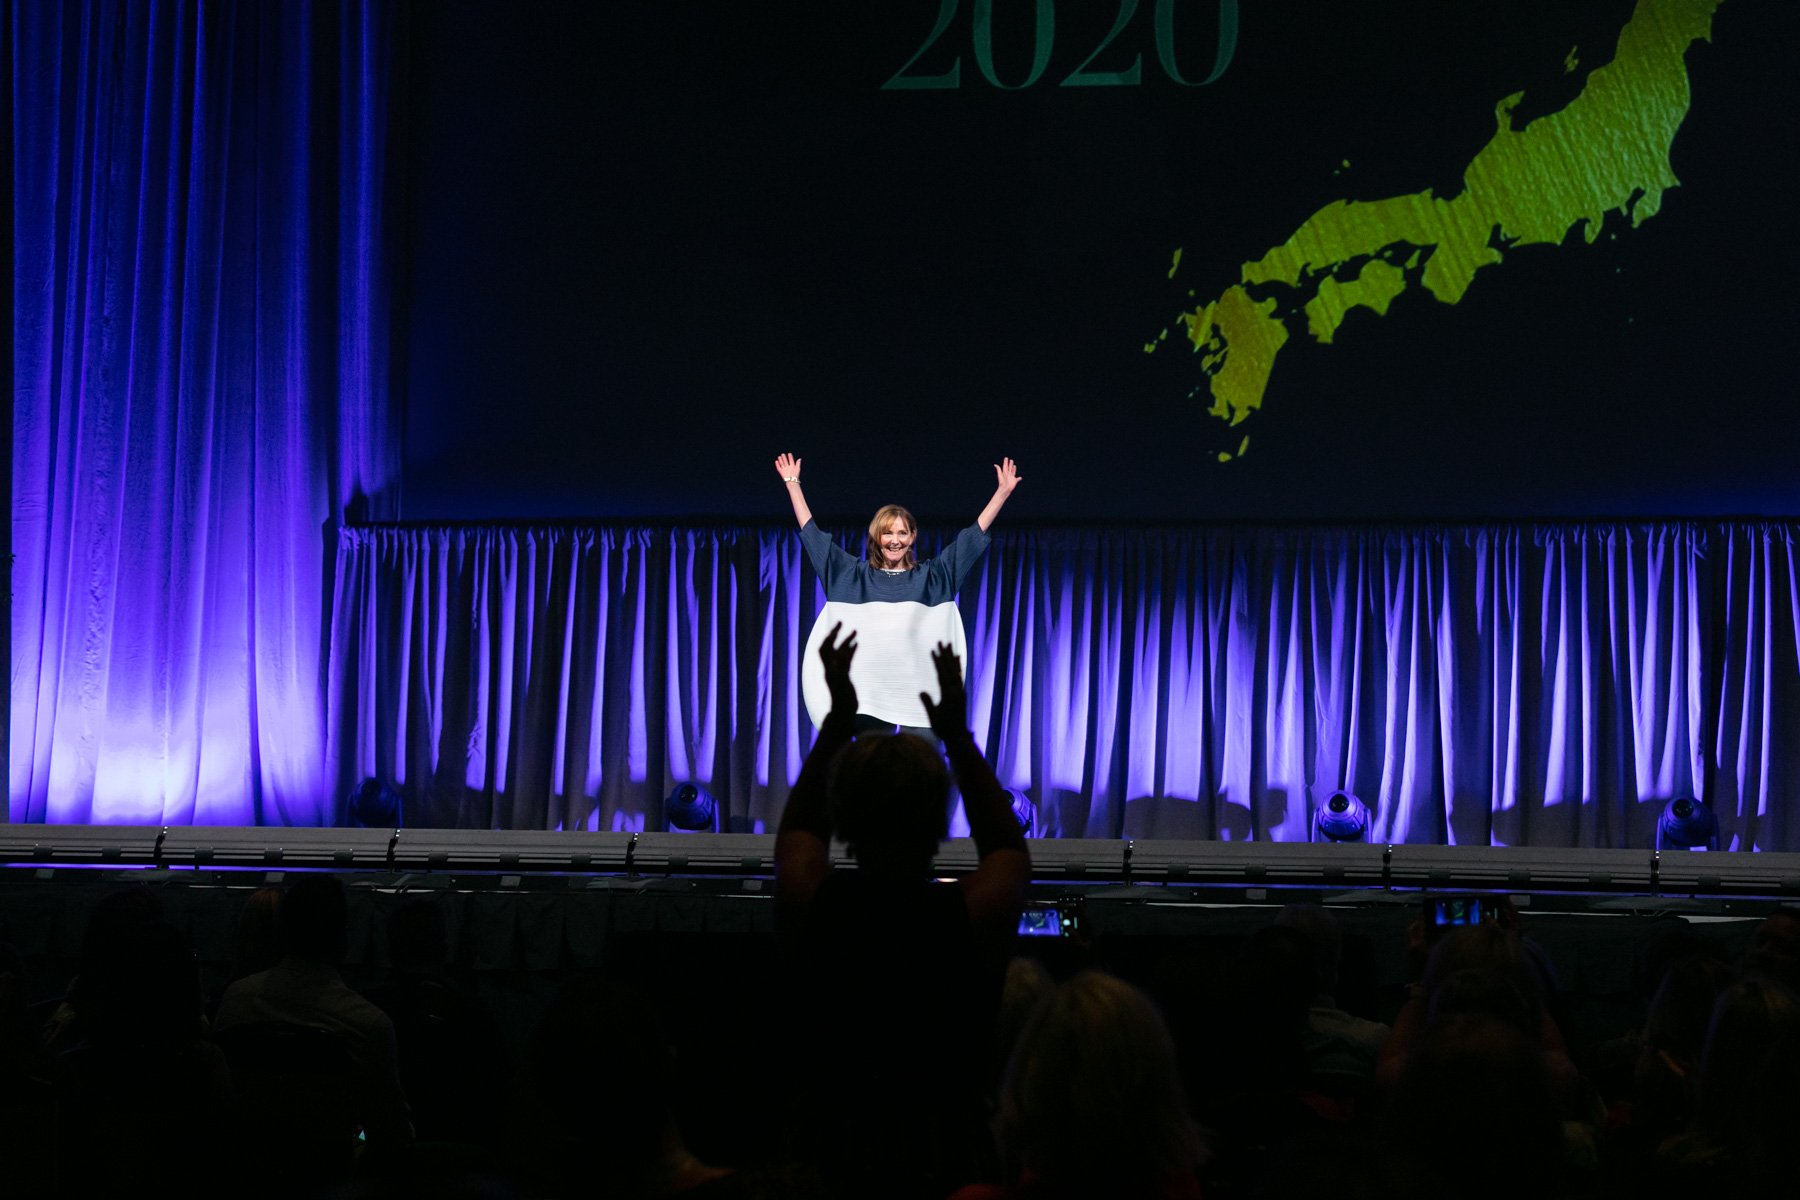 Margo Moritz captures a speaker onstage raising her hands in the air, shadowed by an audience member making a similar gesture